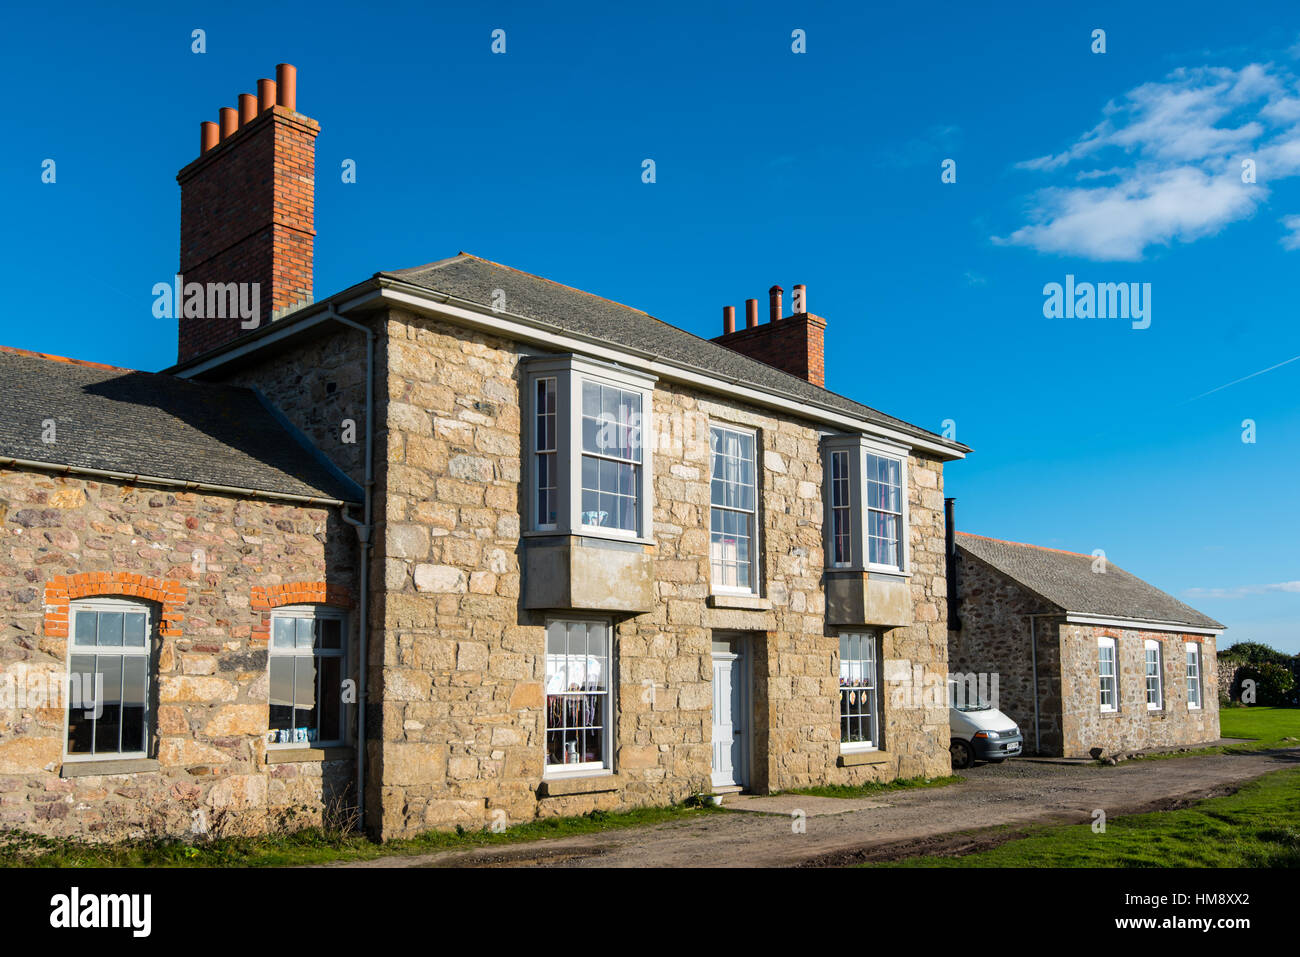 The Count House at Botallack Mine, Cornwall Stock Photo